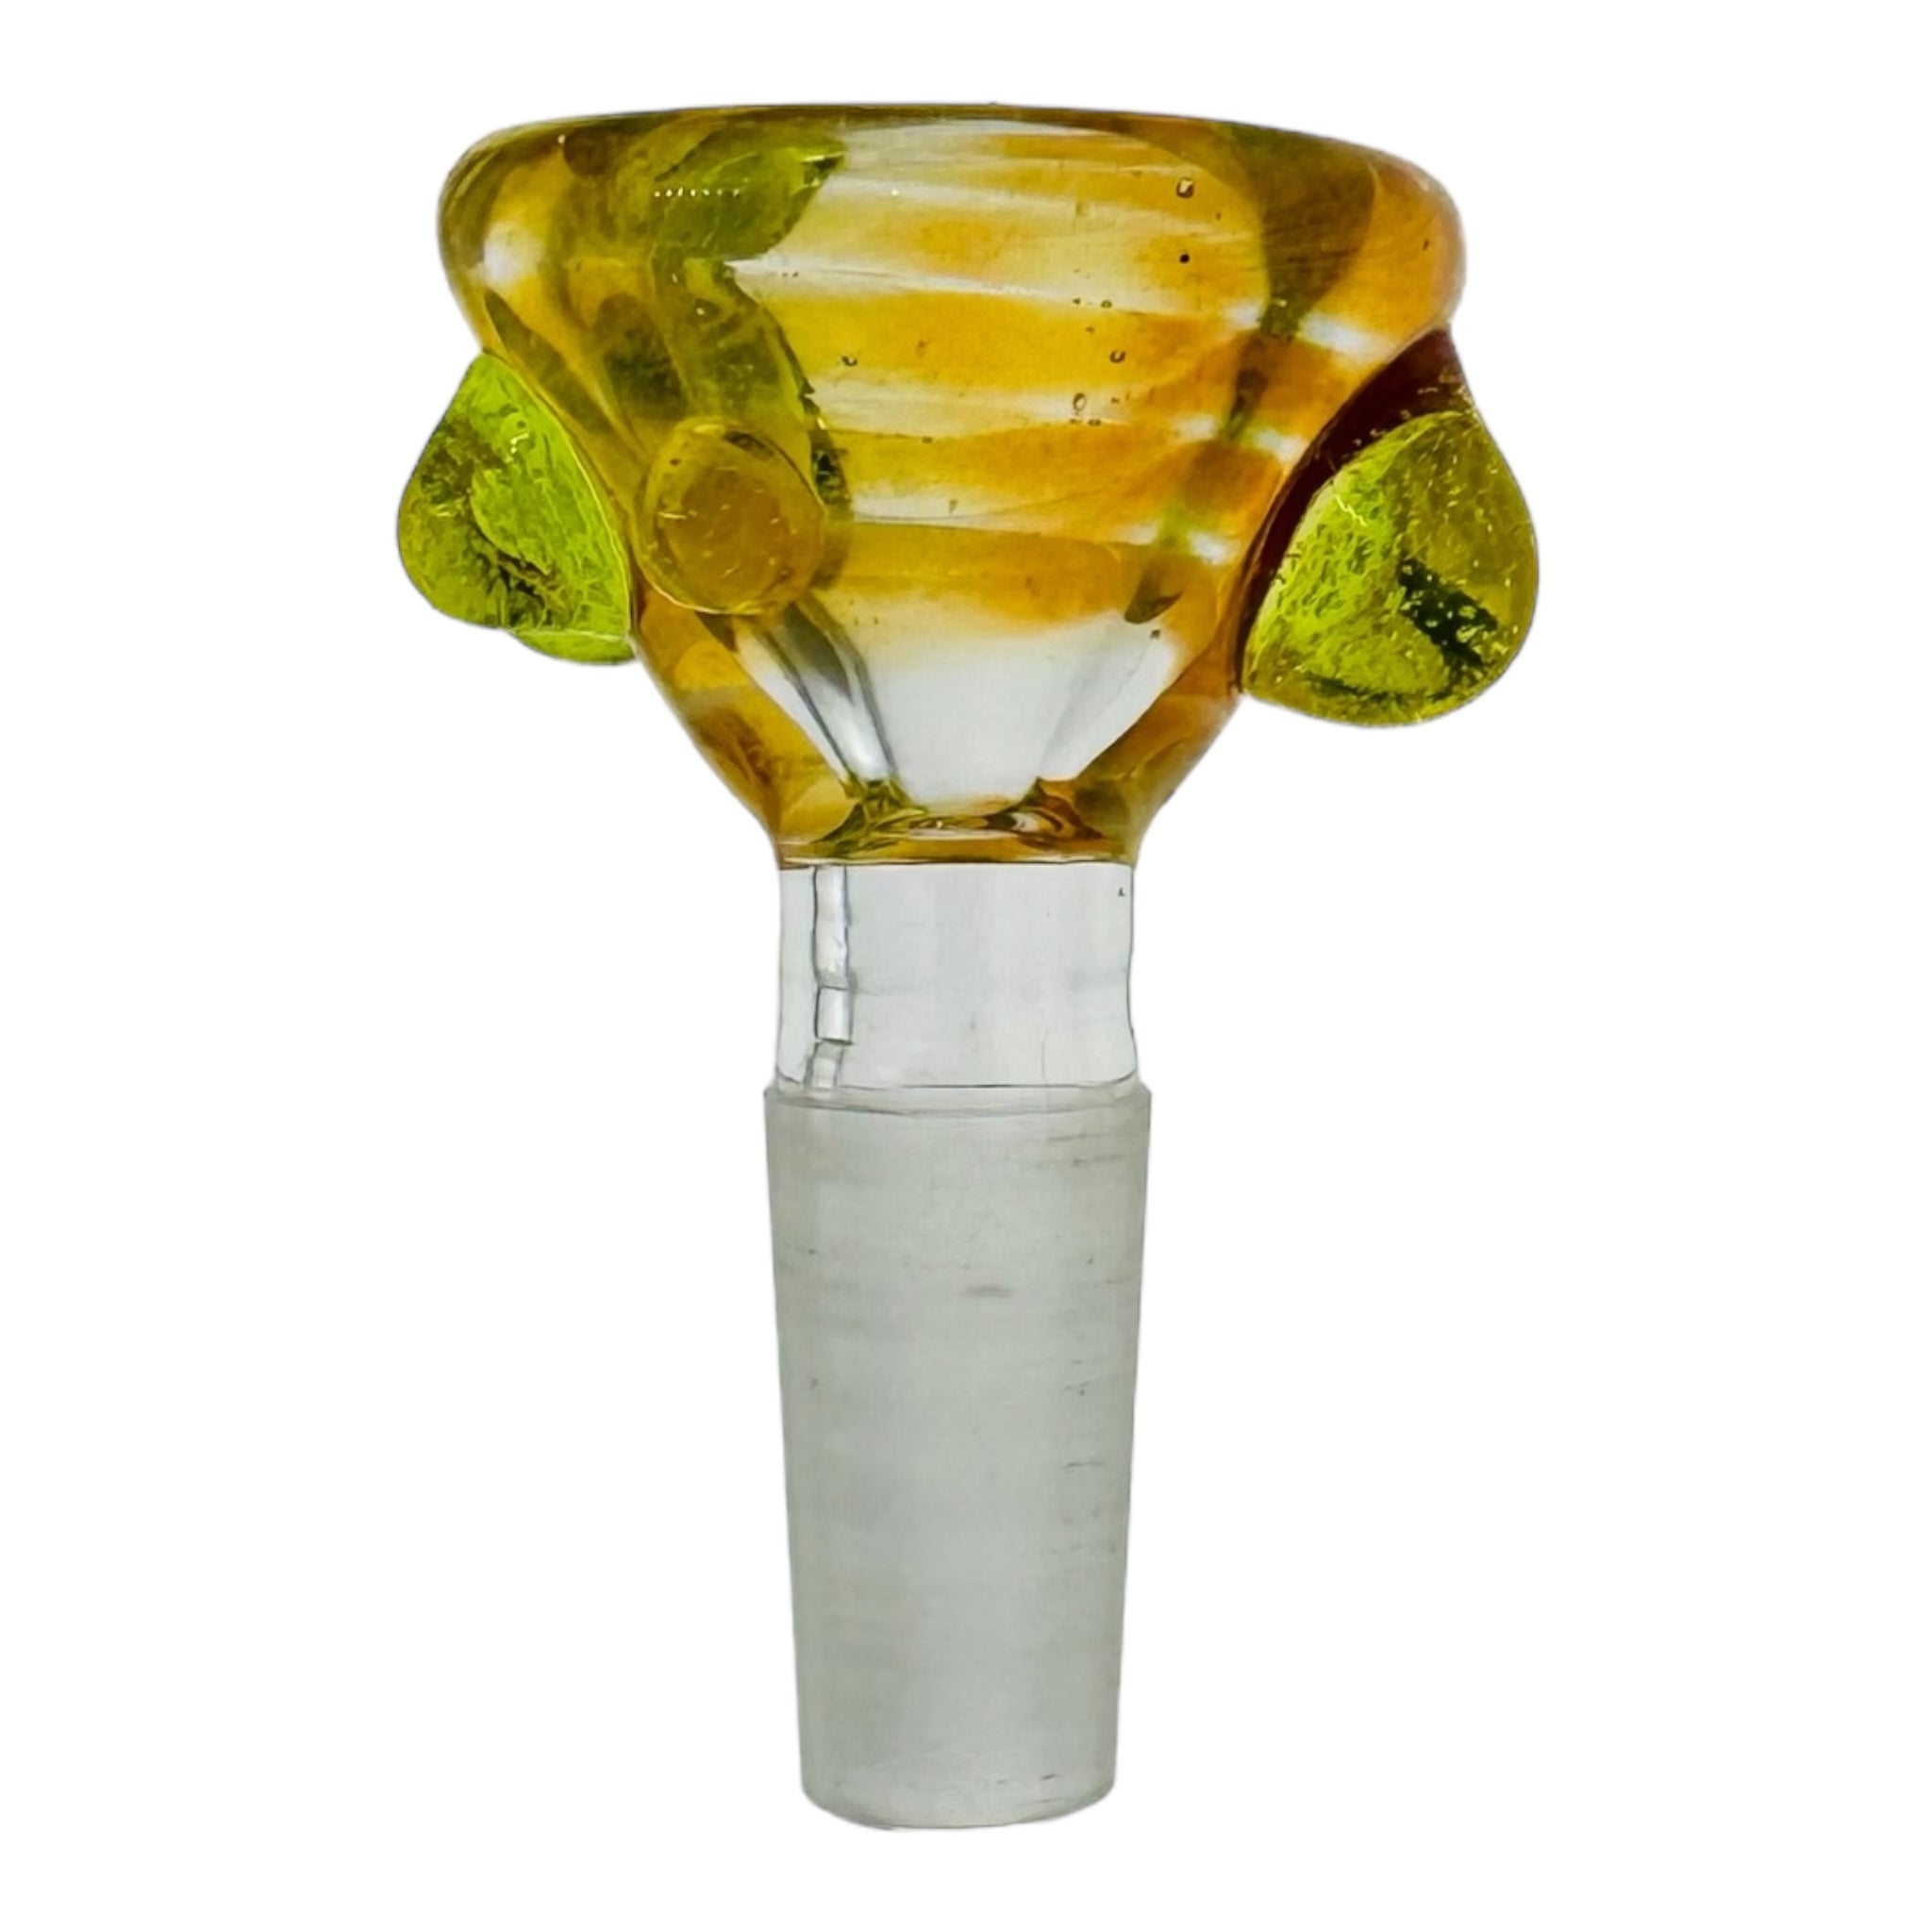 Arko Glass 10mm Bong Bowl For Weed Tuscan Orange Bowl With Hatorade Green Dots